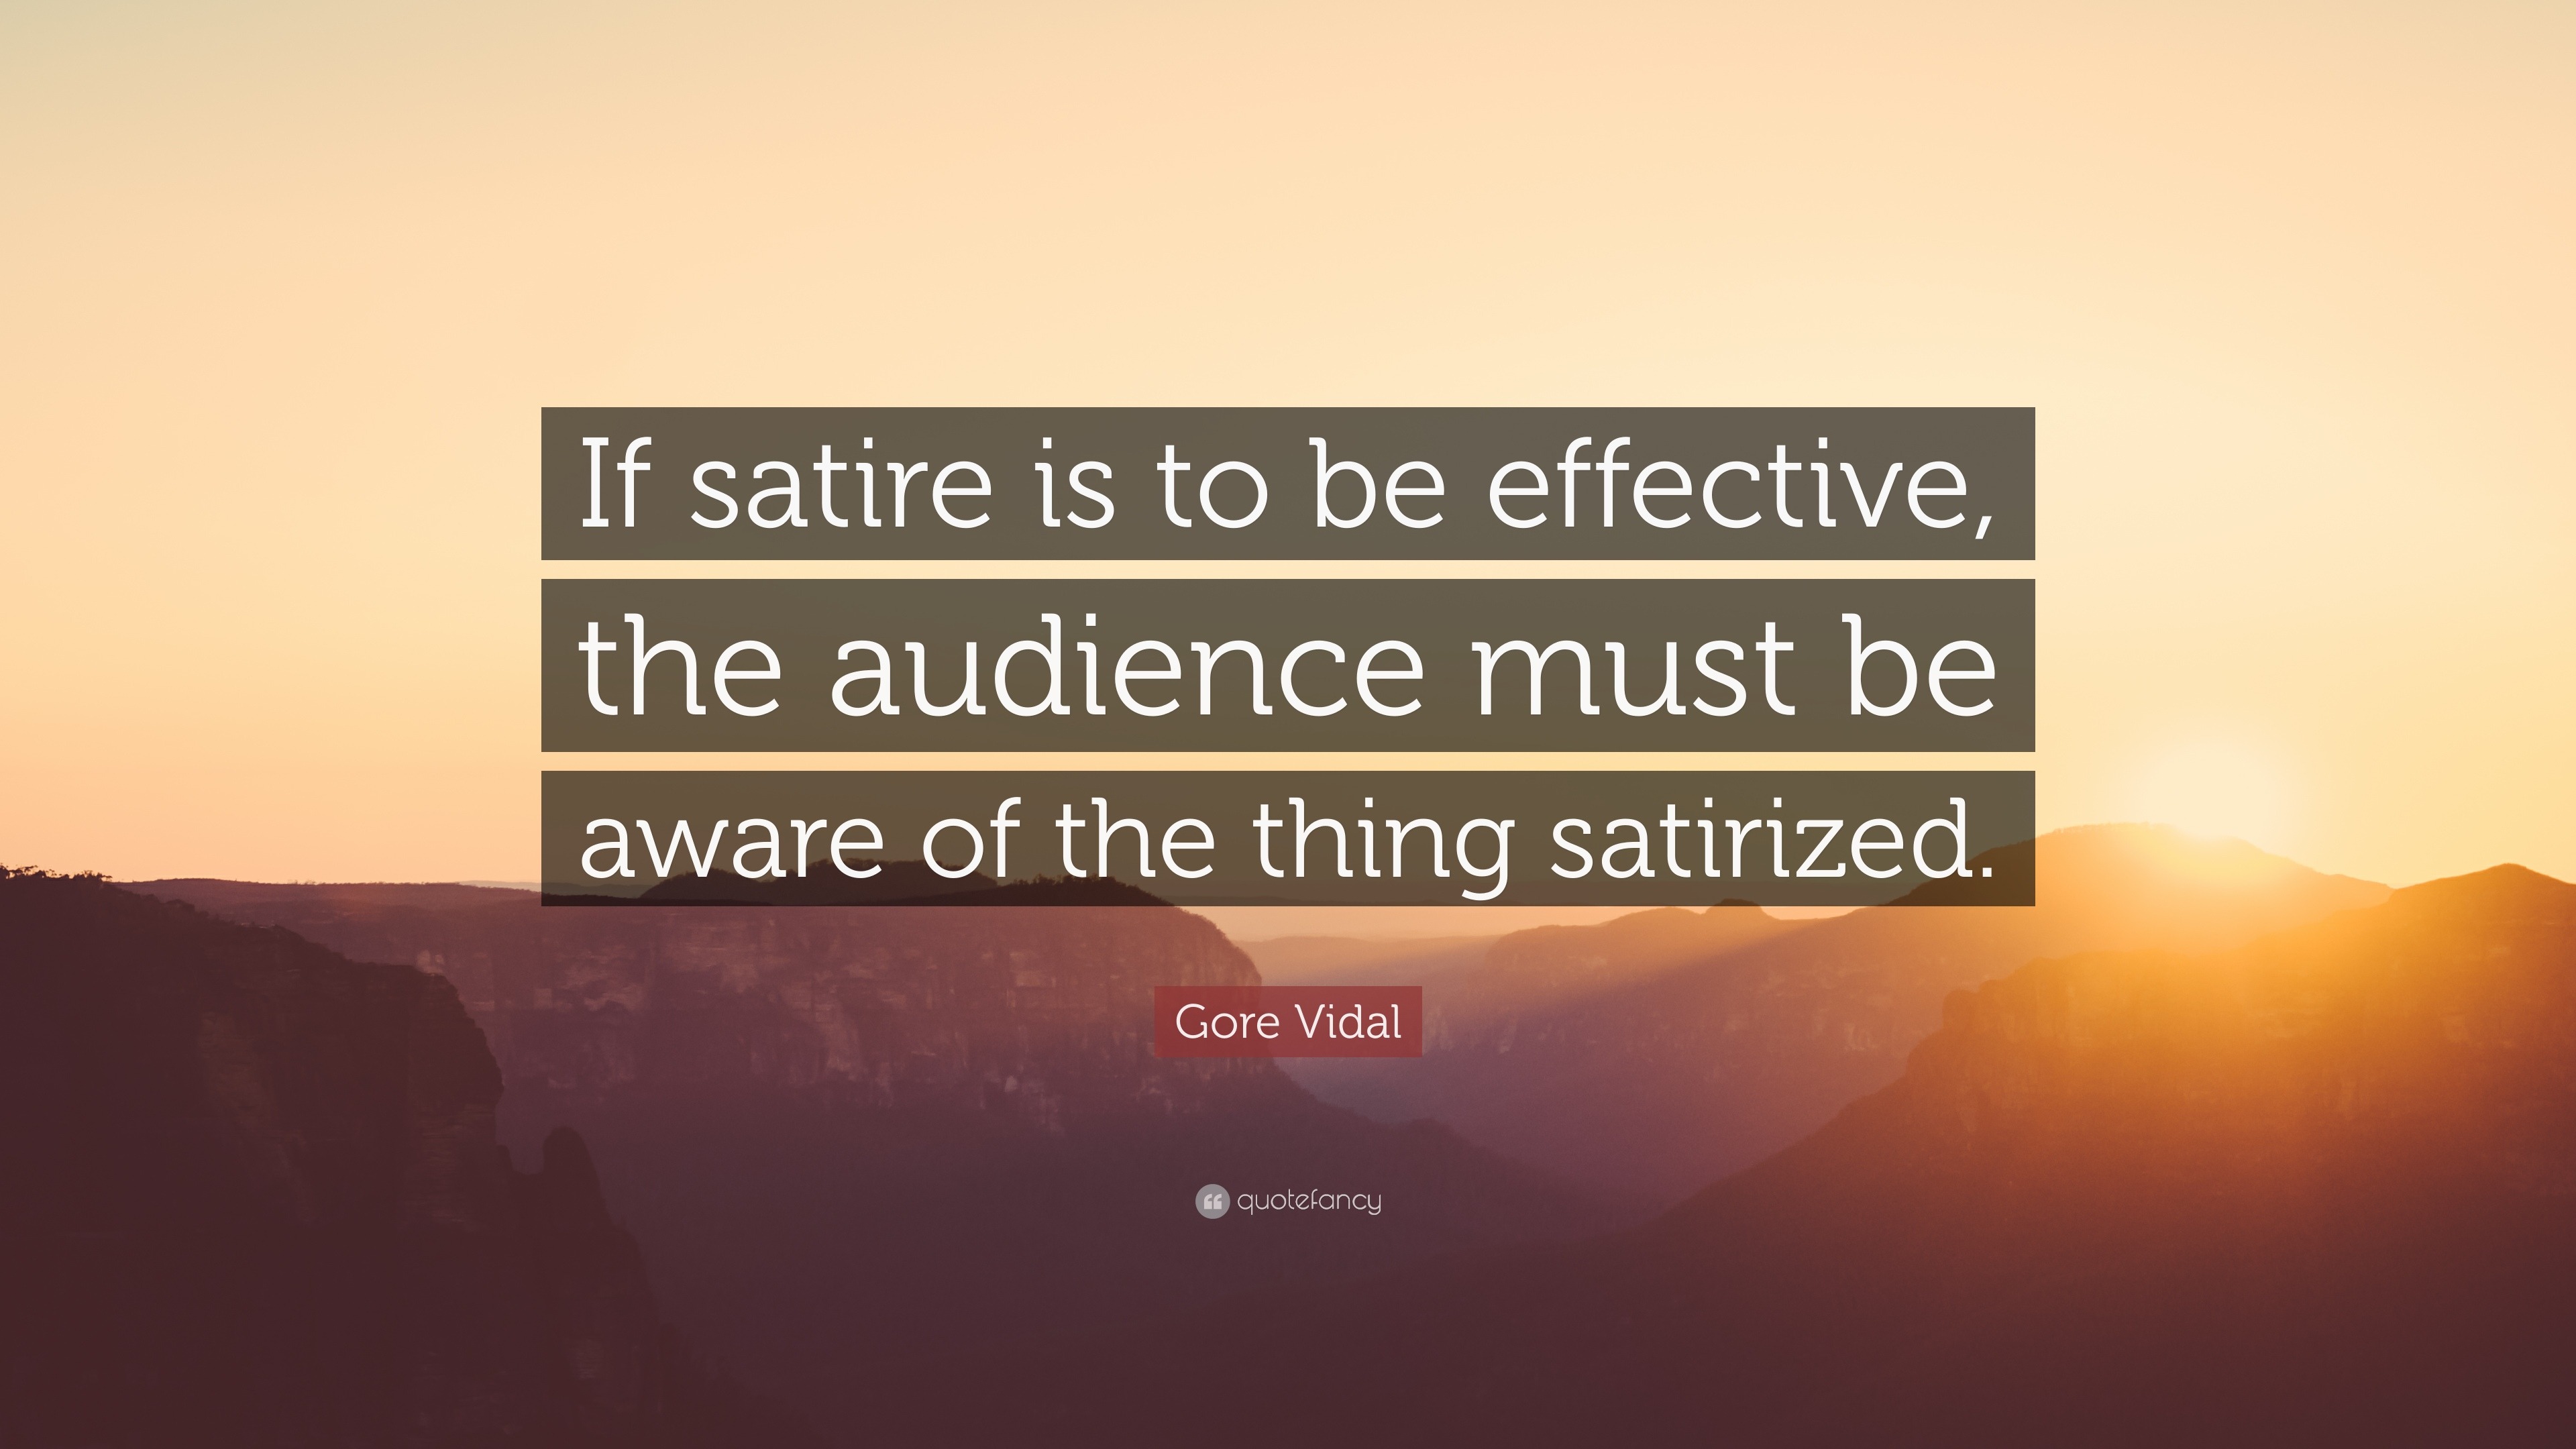 Gore Vidal Quote: “If satire is to be effective, the audience must be ...